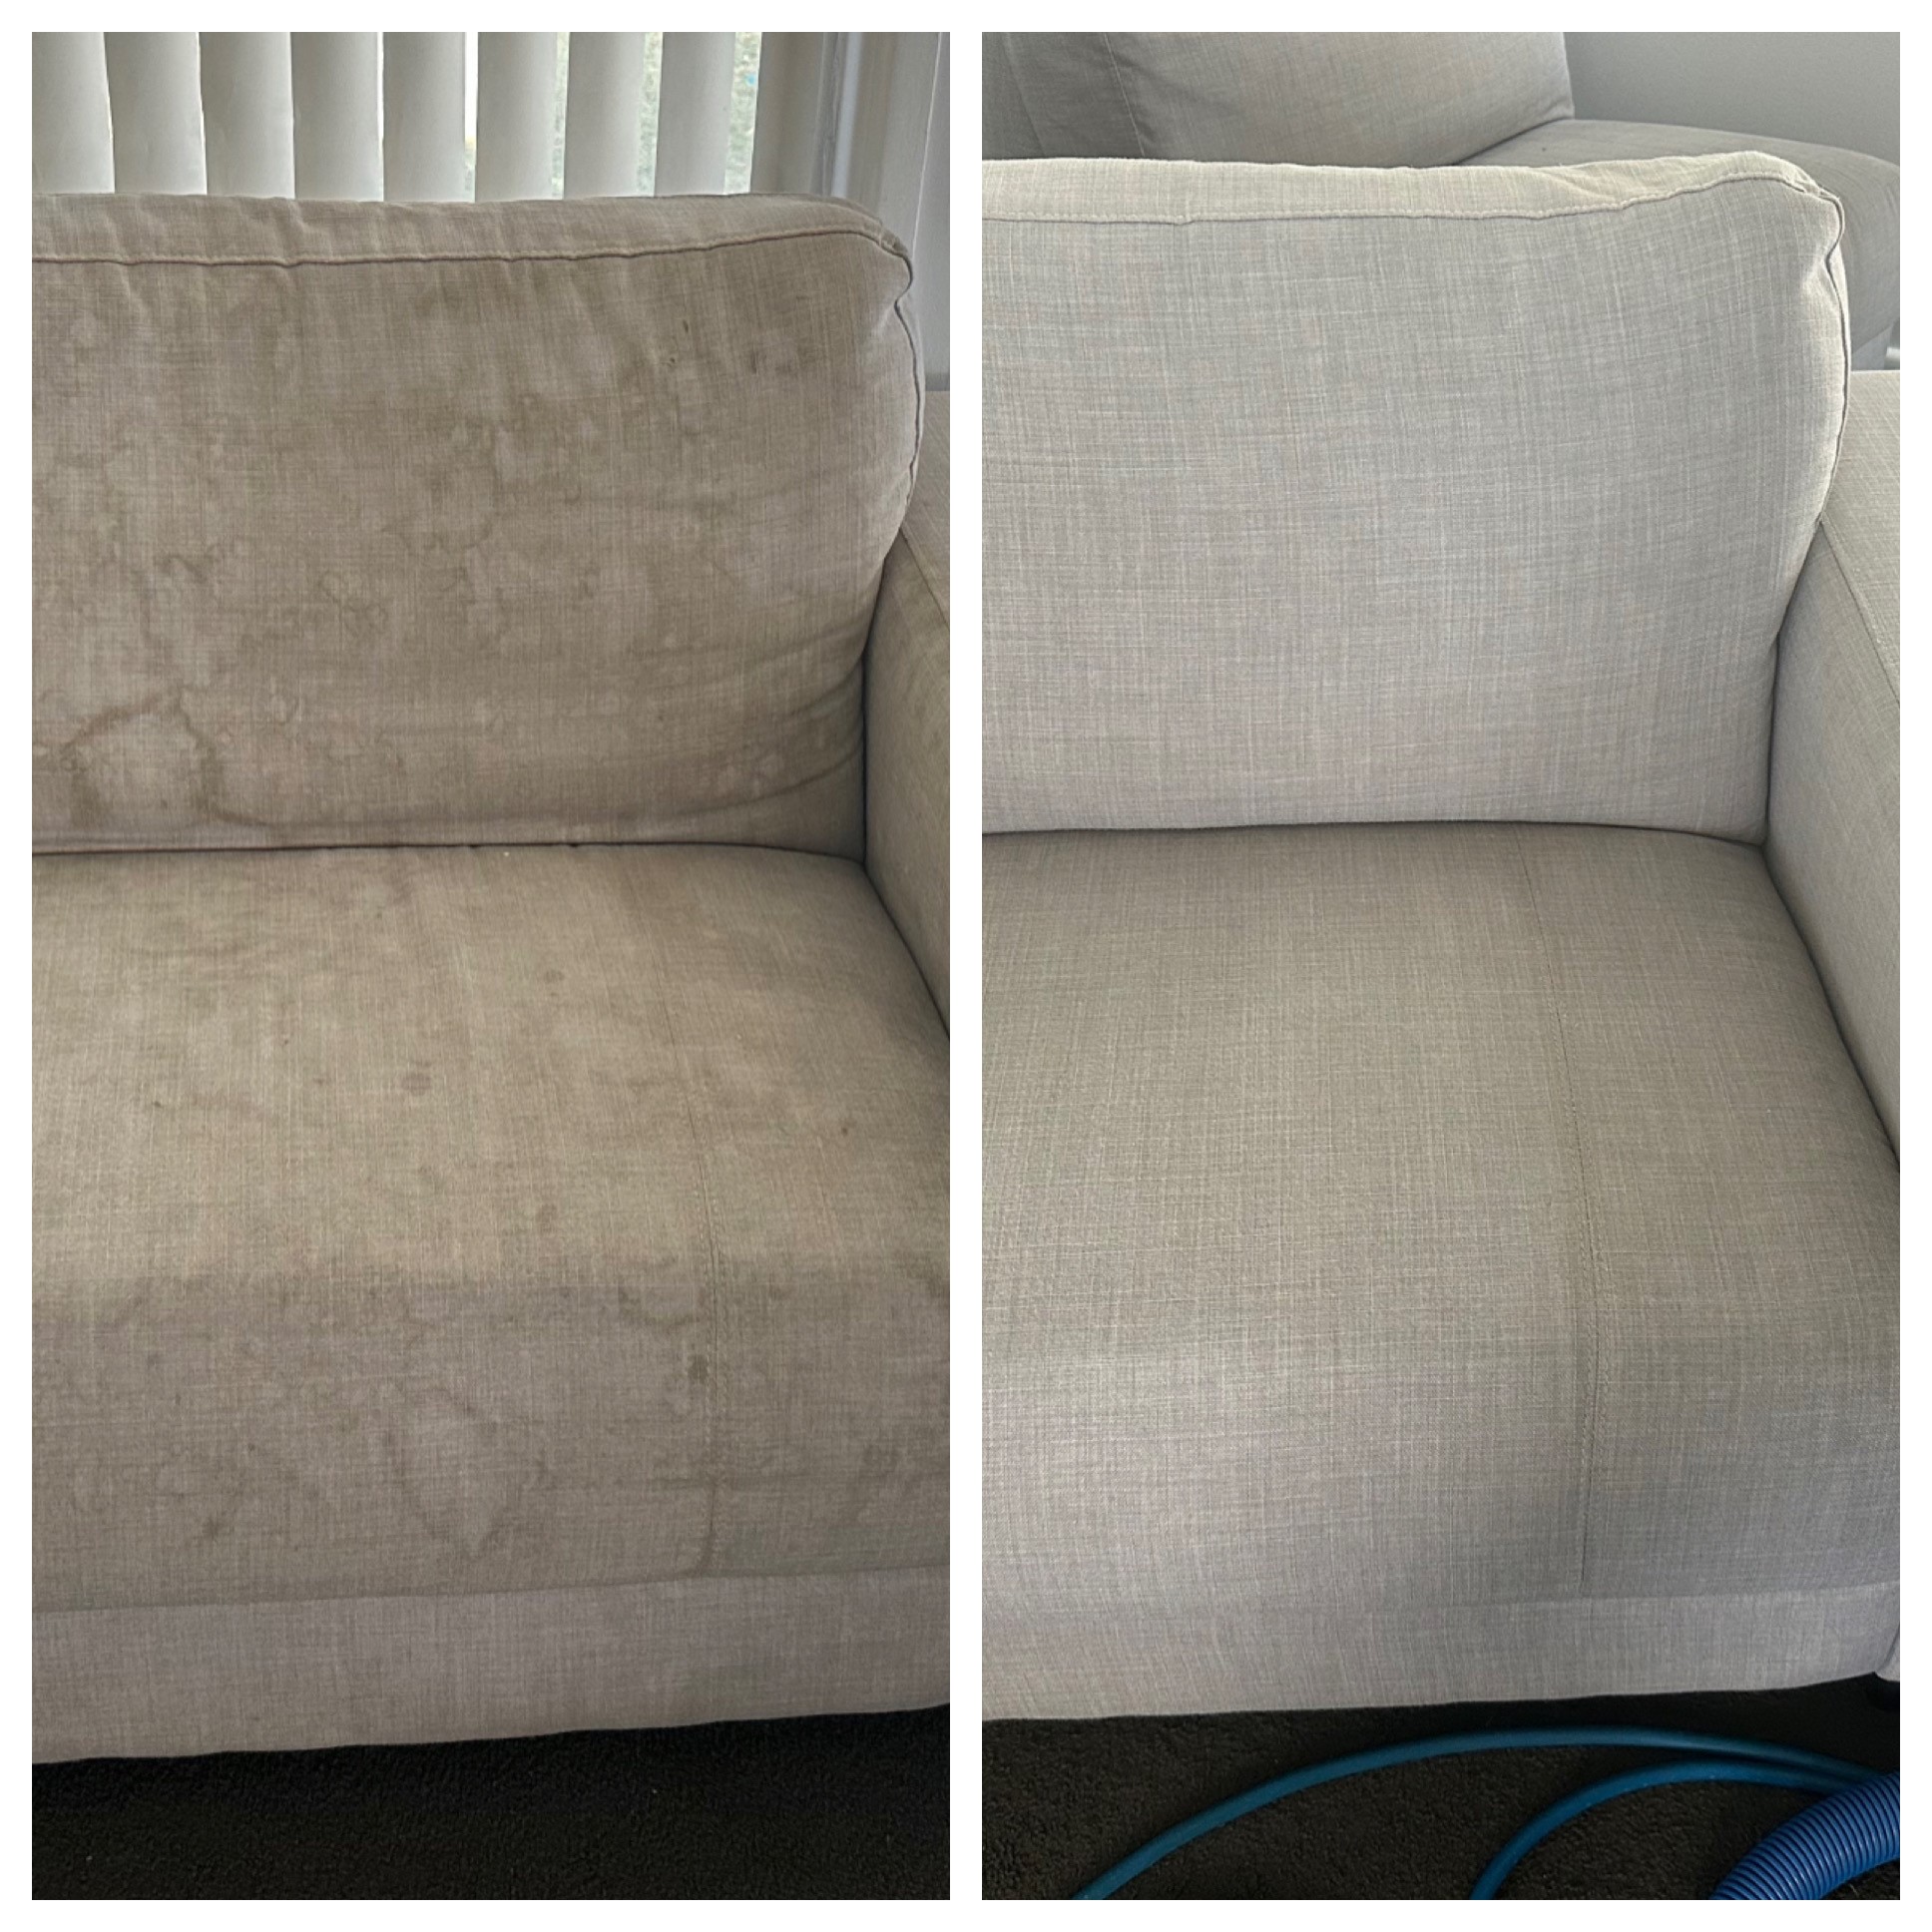 Before/after sofa 2 - clean fabric upholstery Hunter Valley NSW